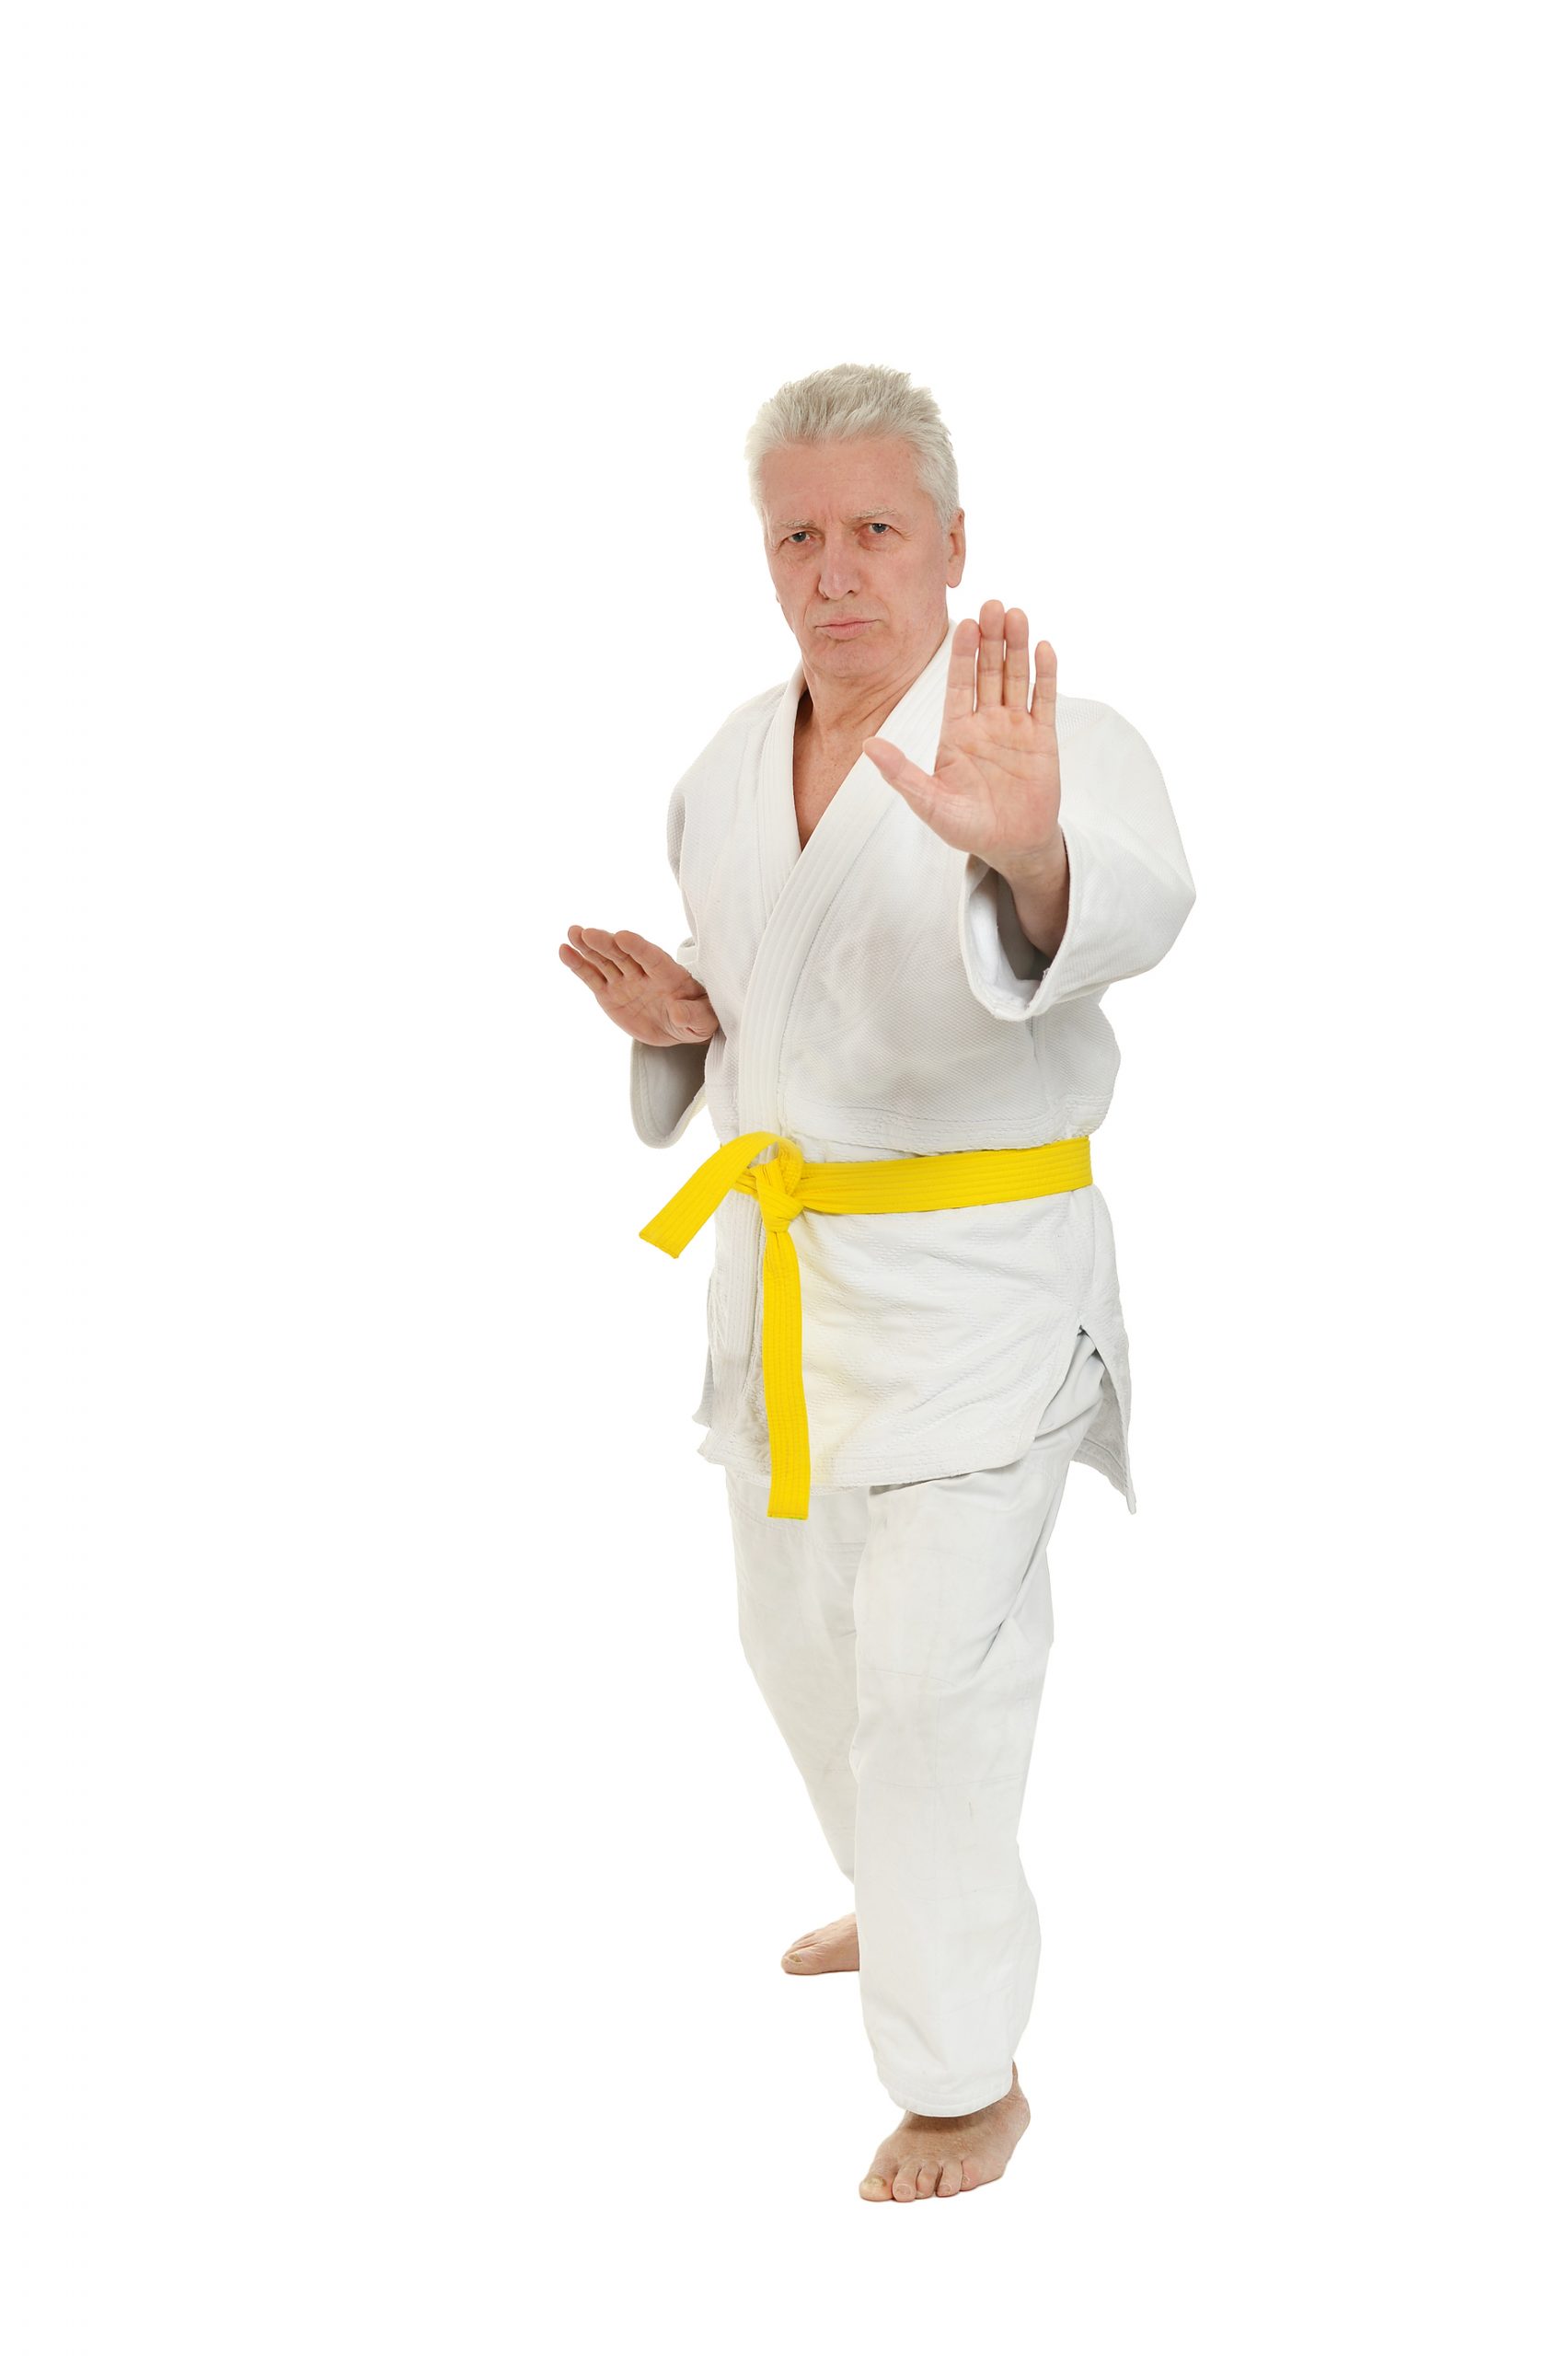 Page 8 | 74,000+ Karate Pose Pictures